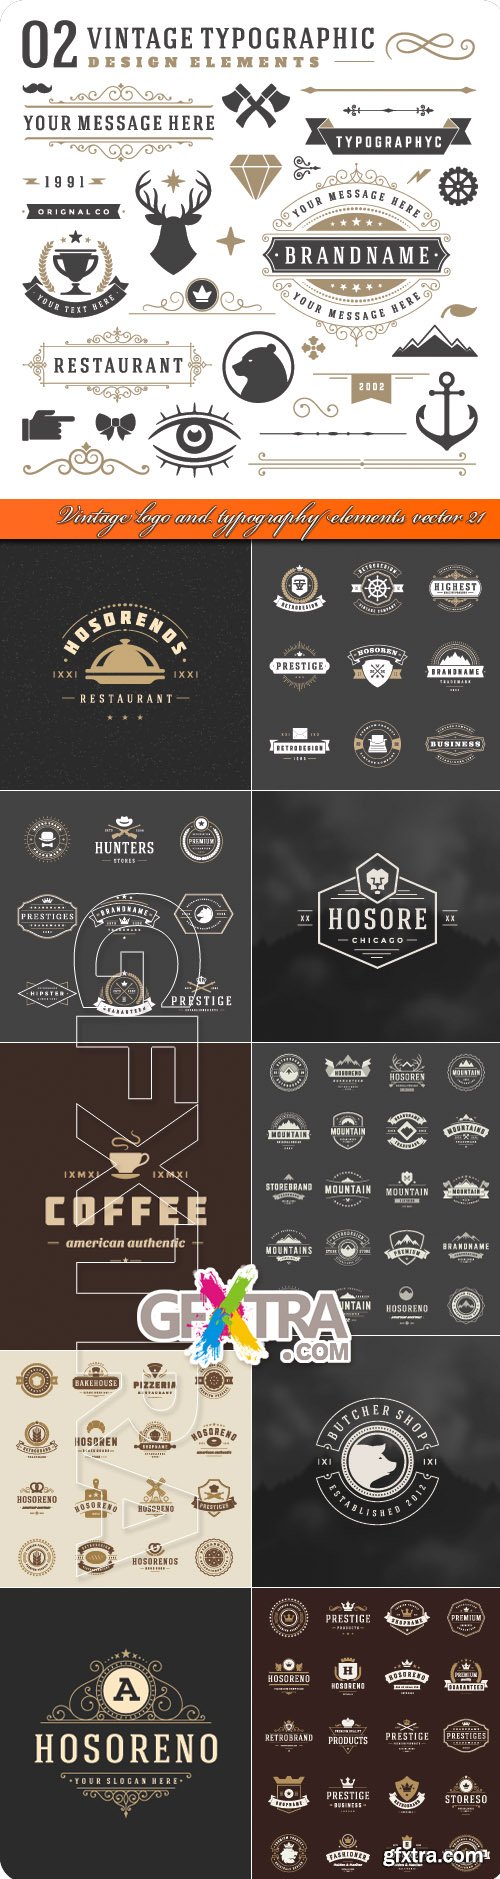 Vintage logo and typography elements vector 21